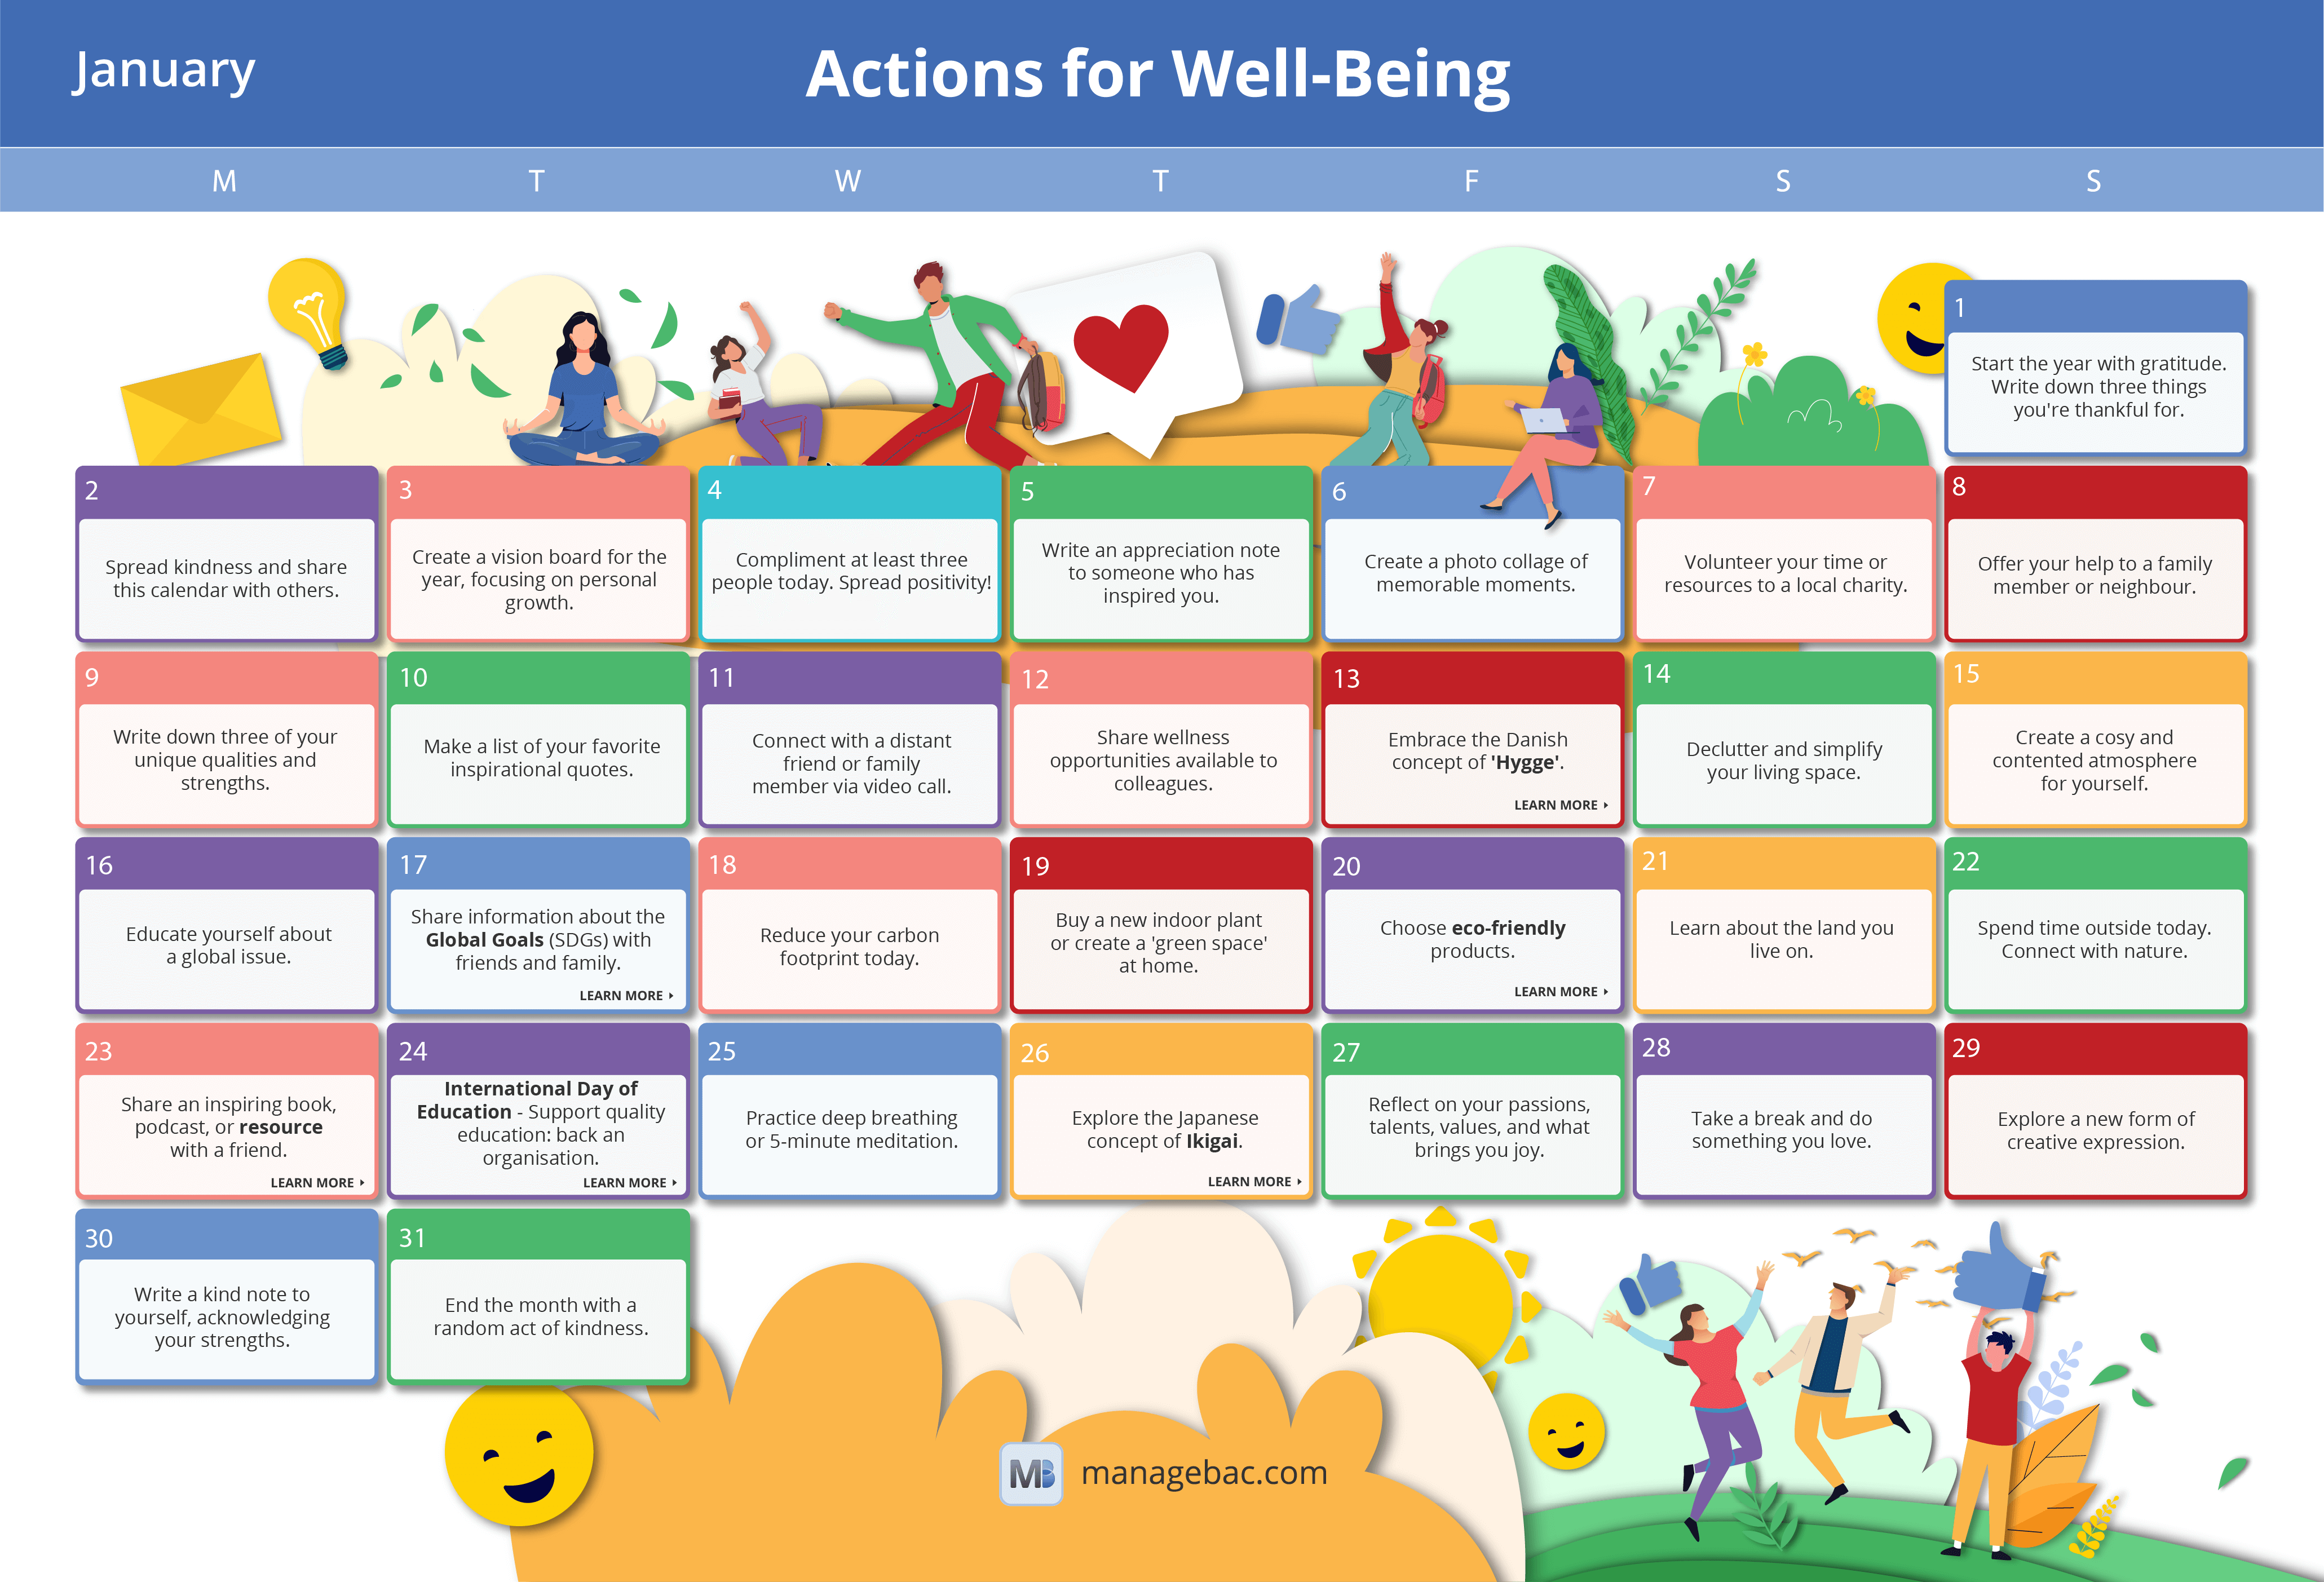 Actions for Well-Being